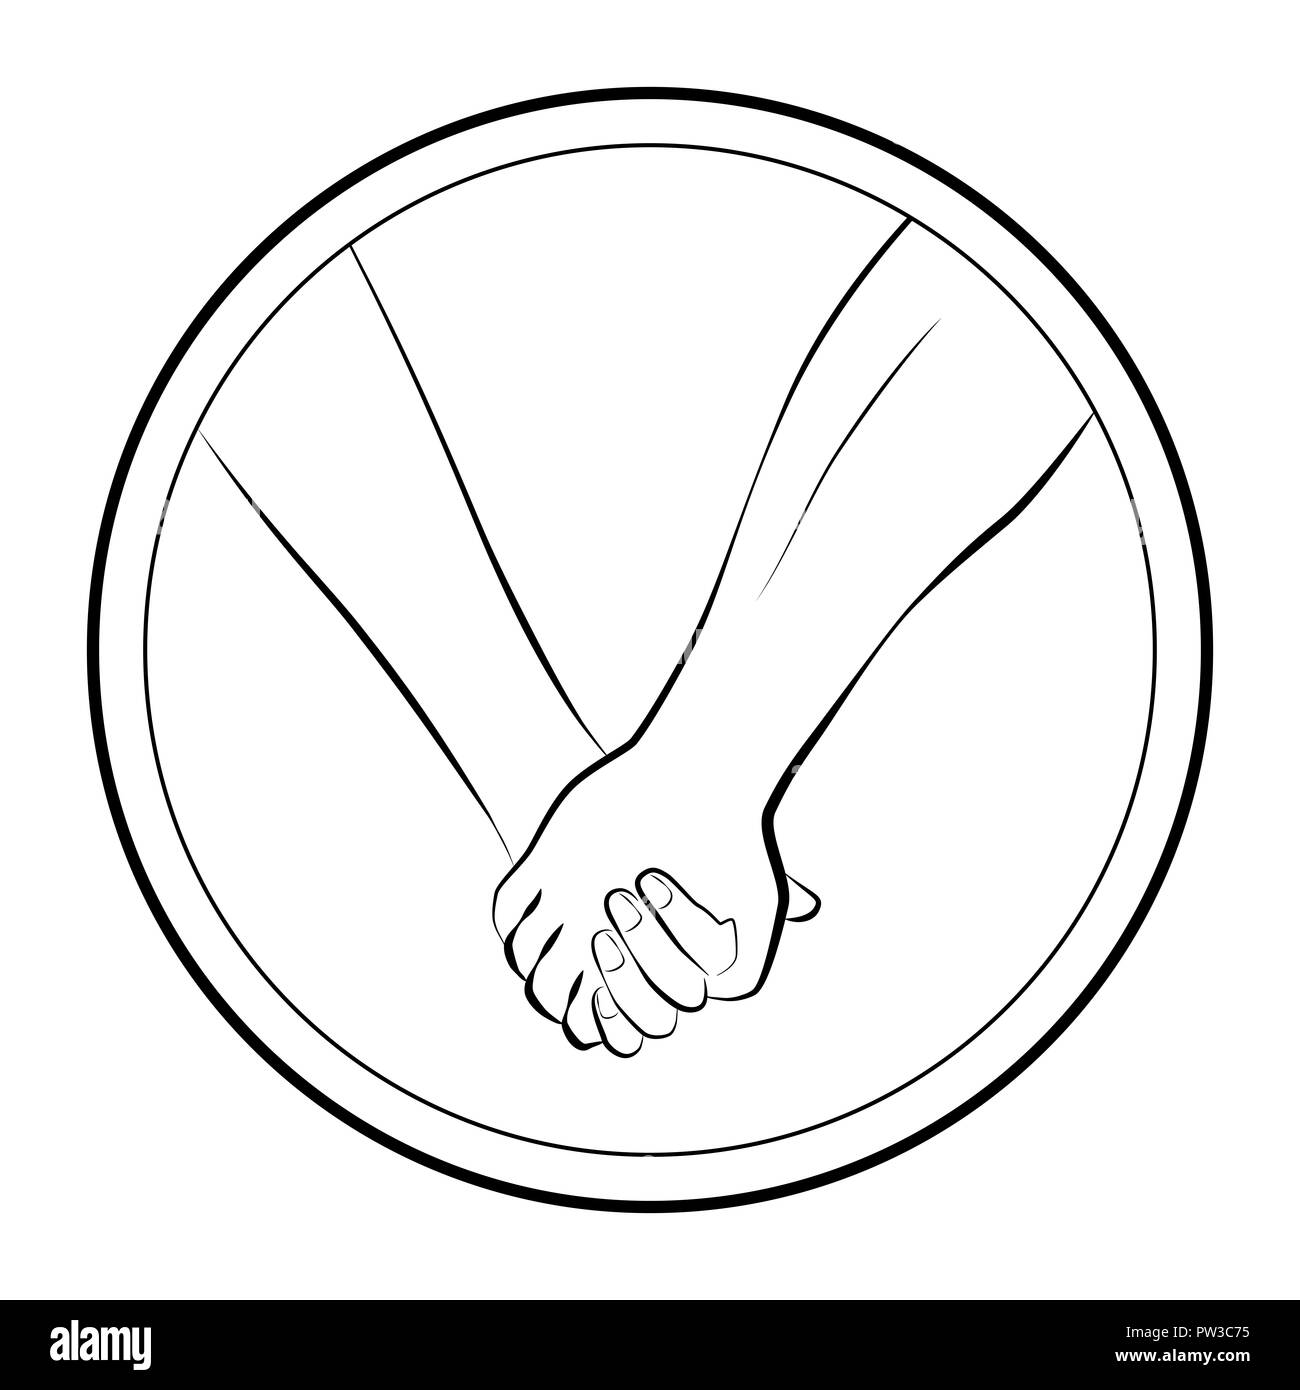 Holding hands of a love couple - round logo outline illustration on white background. Stock Photo